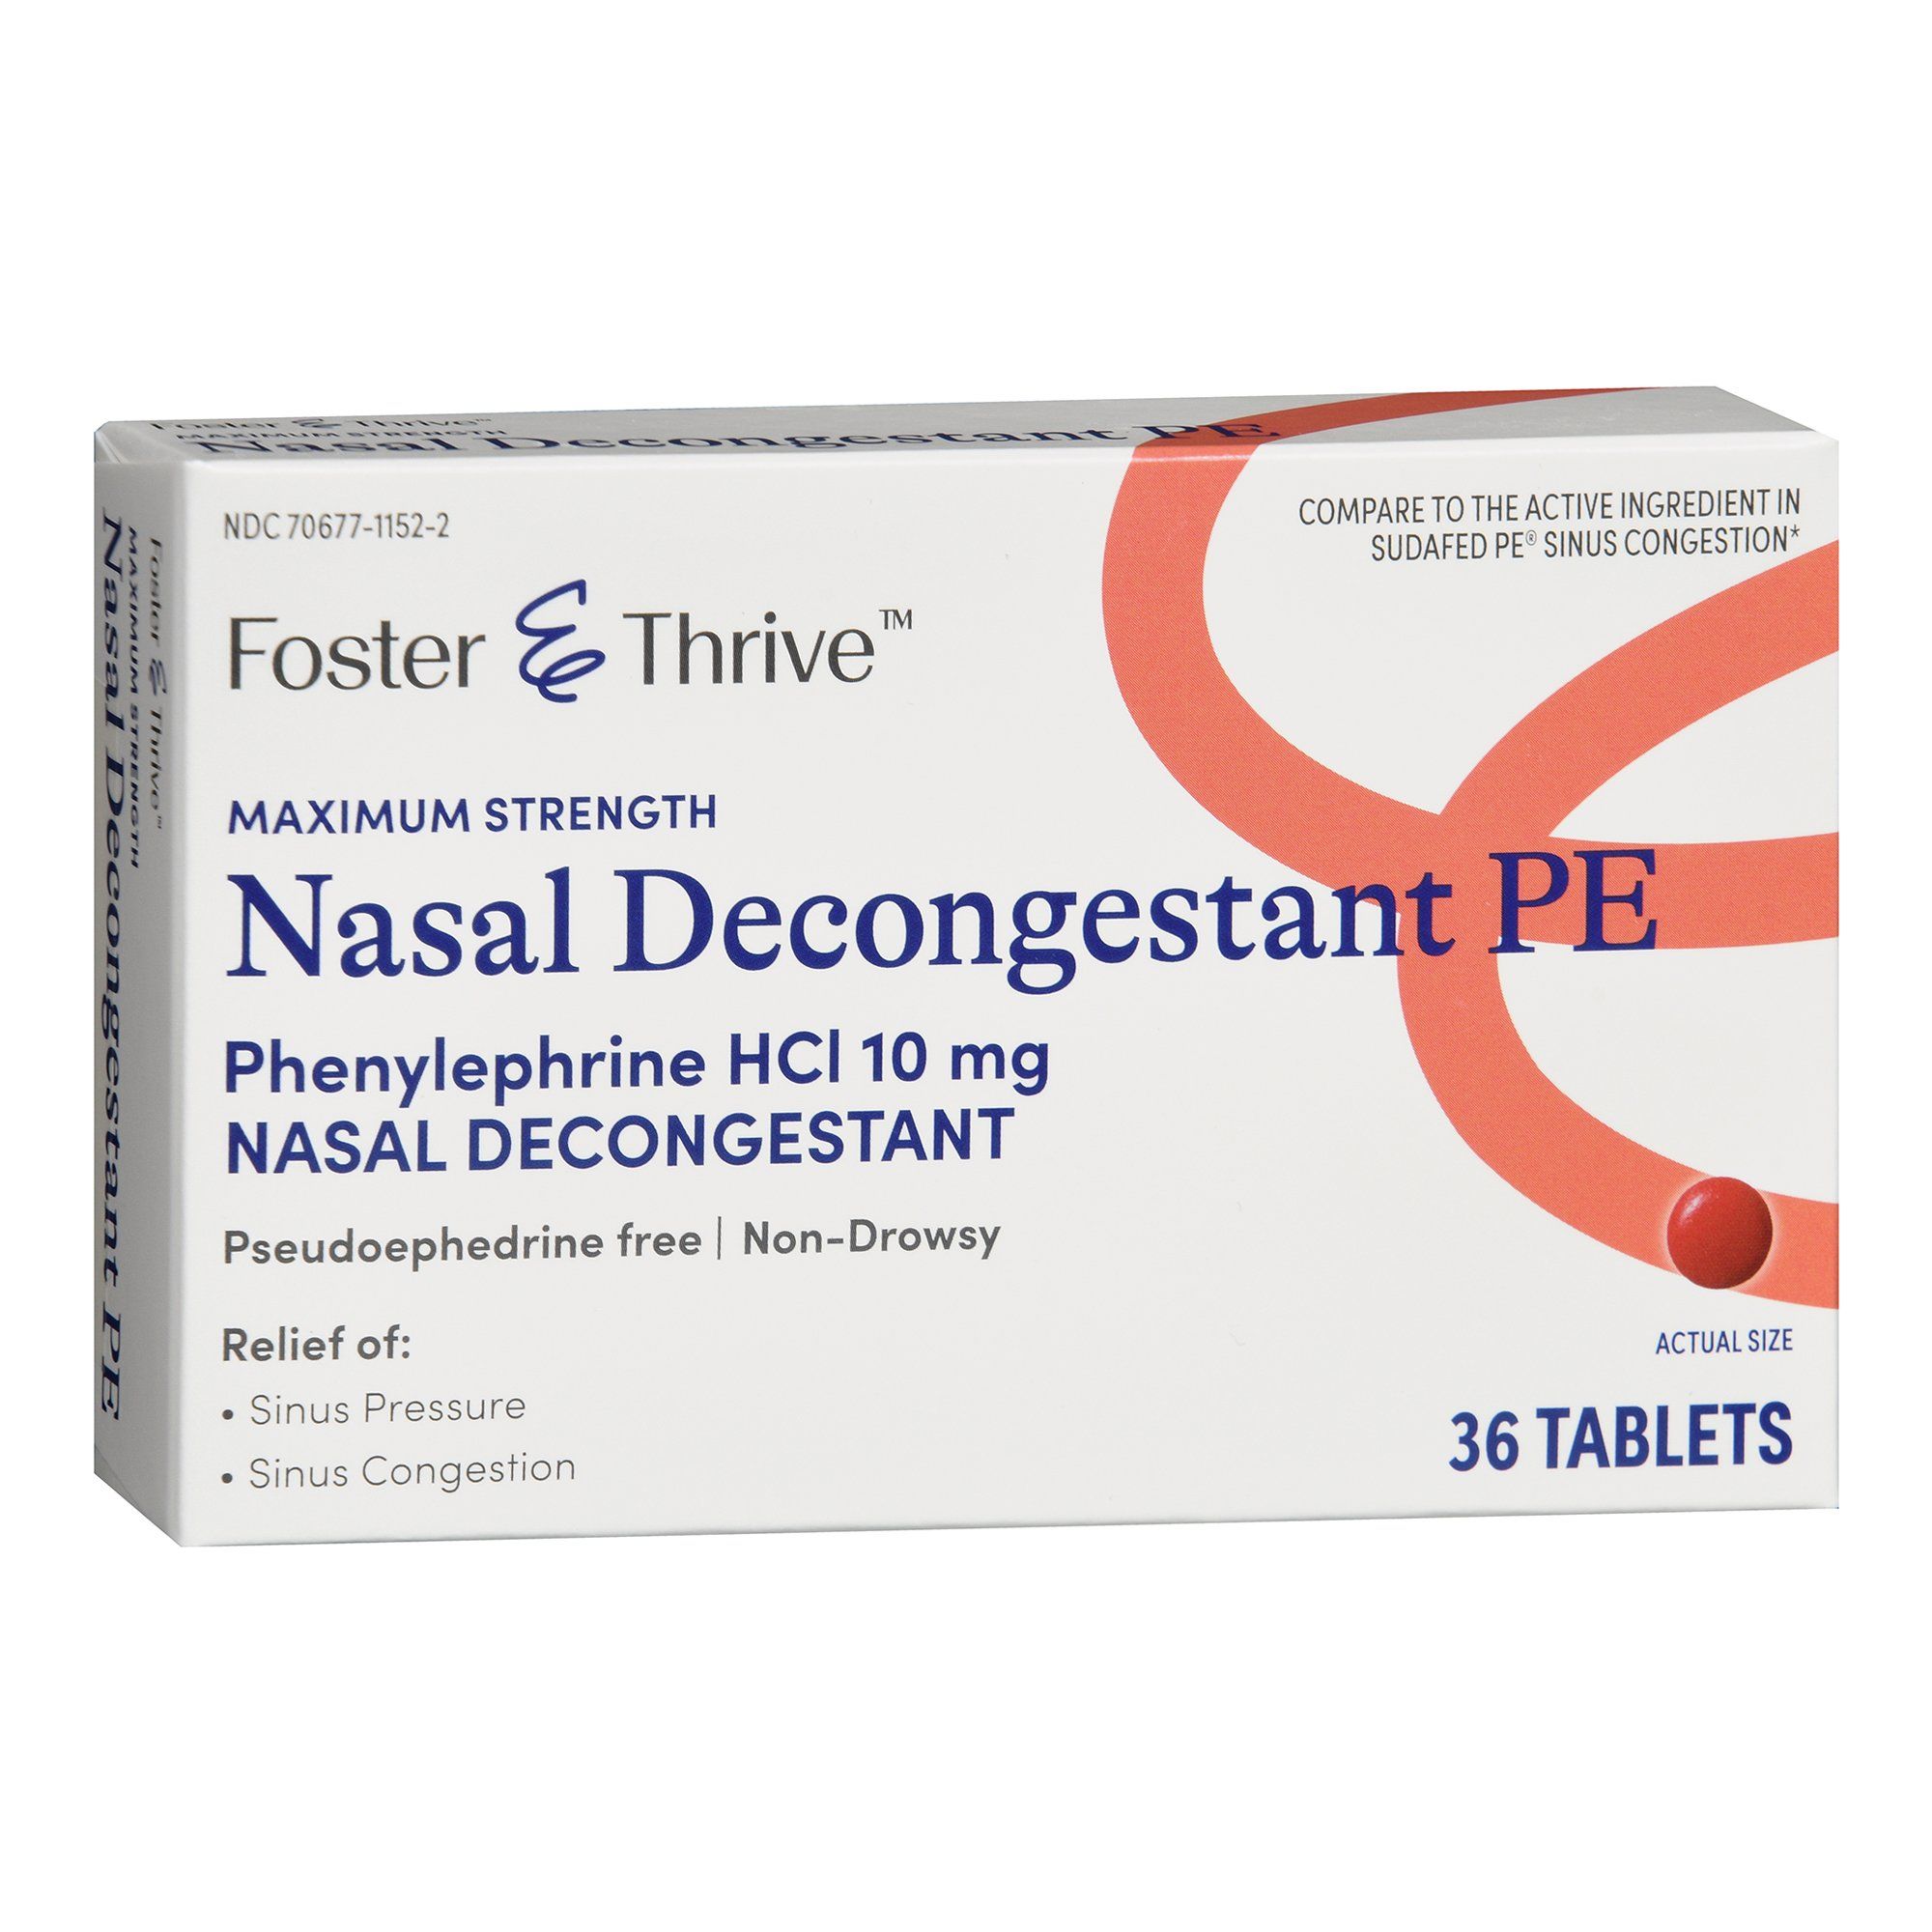 Foster & Thrive Maximum Strength Nasal Decongestant PE Phenylephrine HCl Tablets, 10 mg -  36 ct